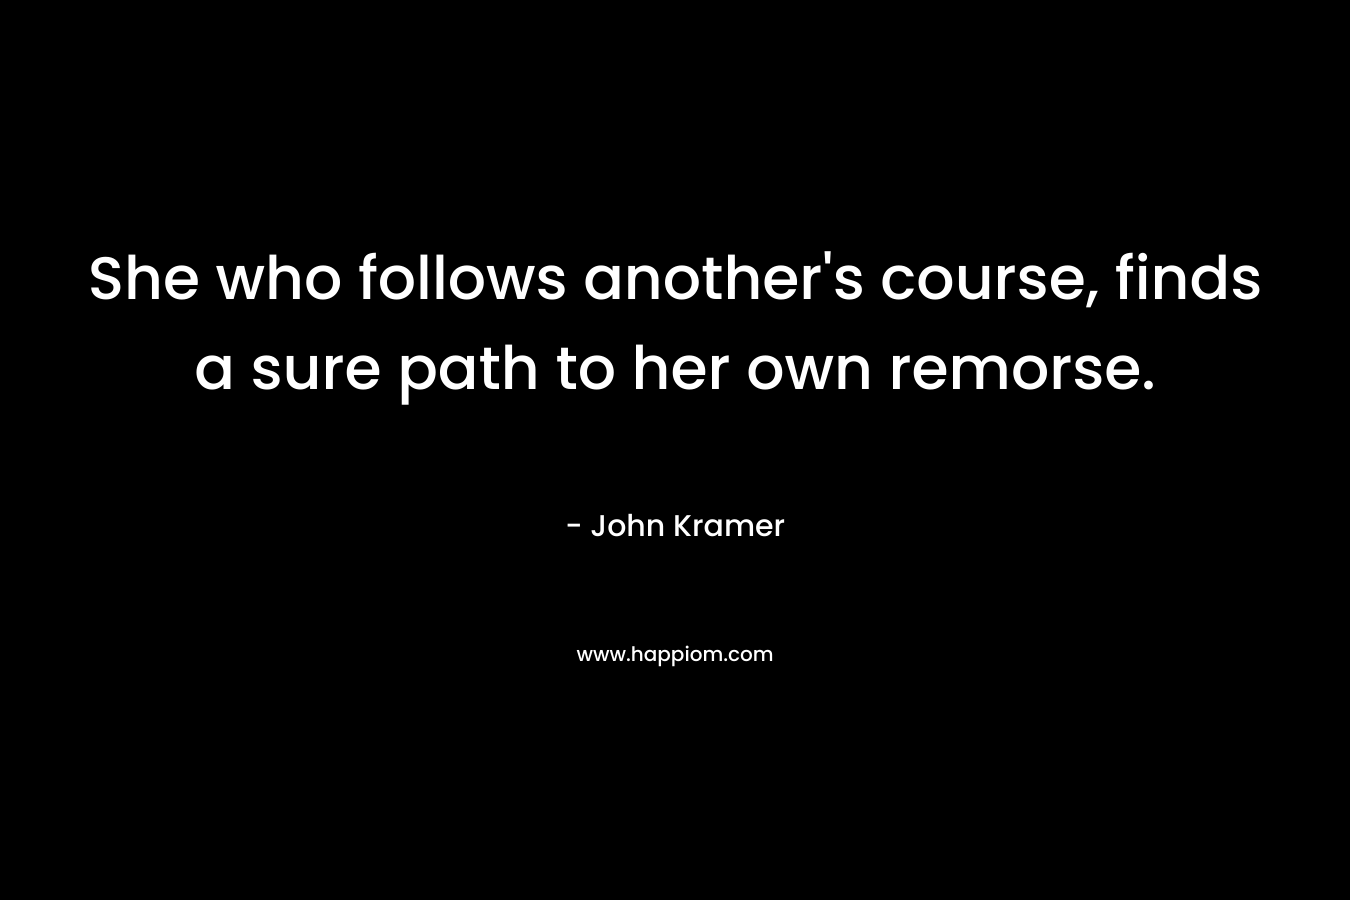 She who follows another's course, finds a sure path to her own remorse.